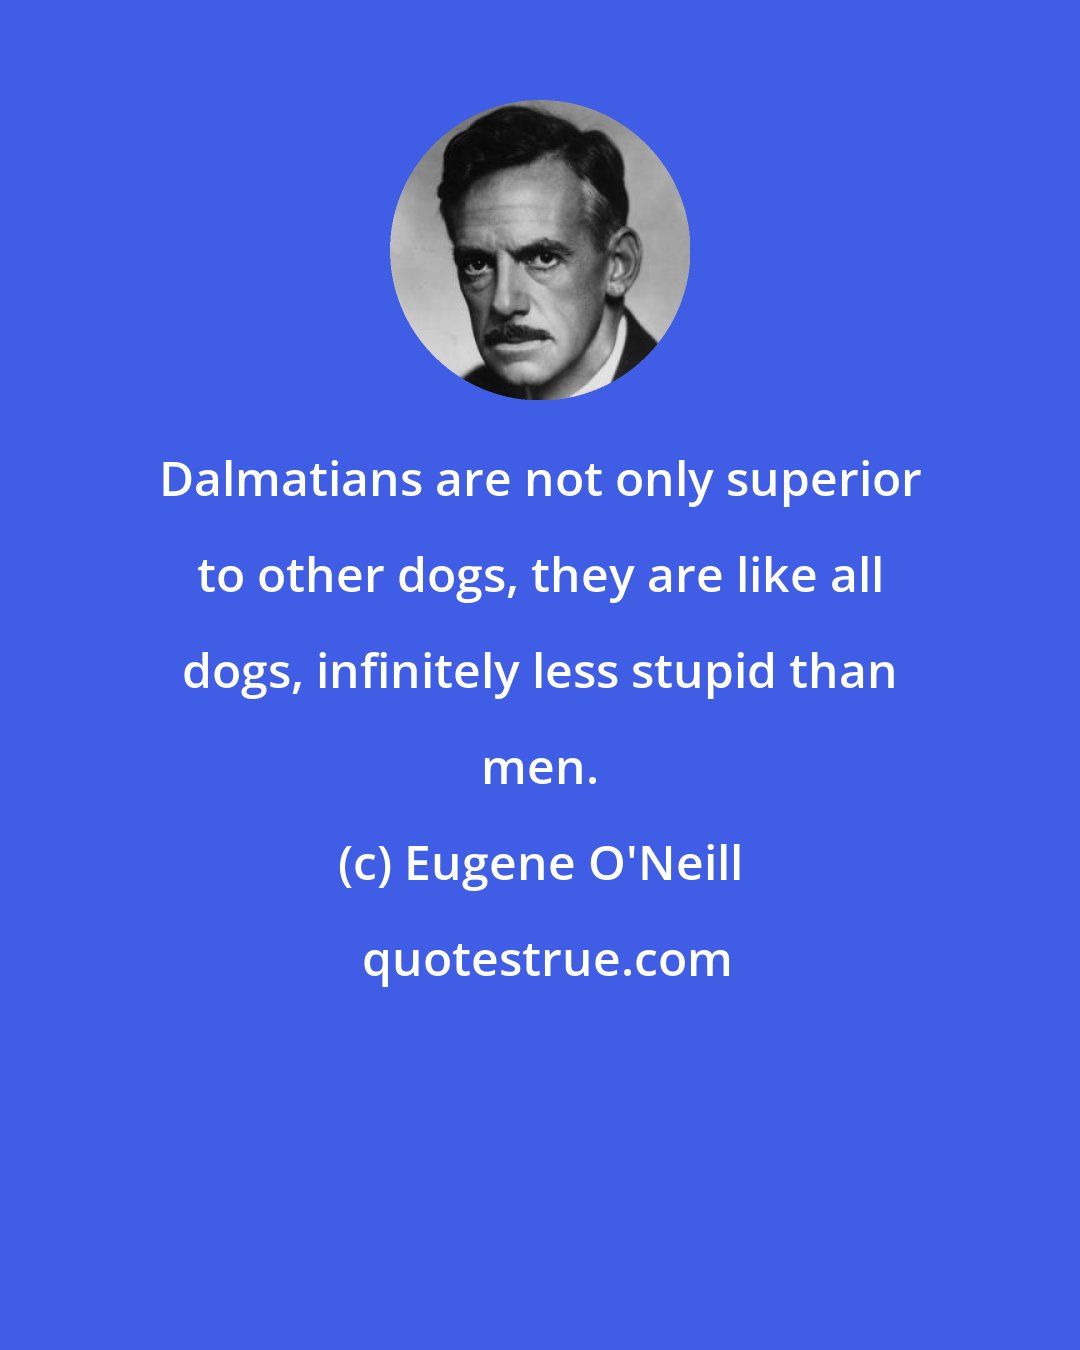 Eugene O'Neill: Dalmatians are not only superior to other dogs, they are like all dogs, infinitely less stupid than men.